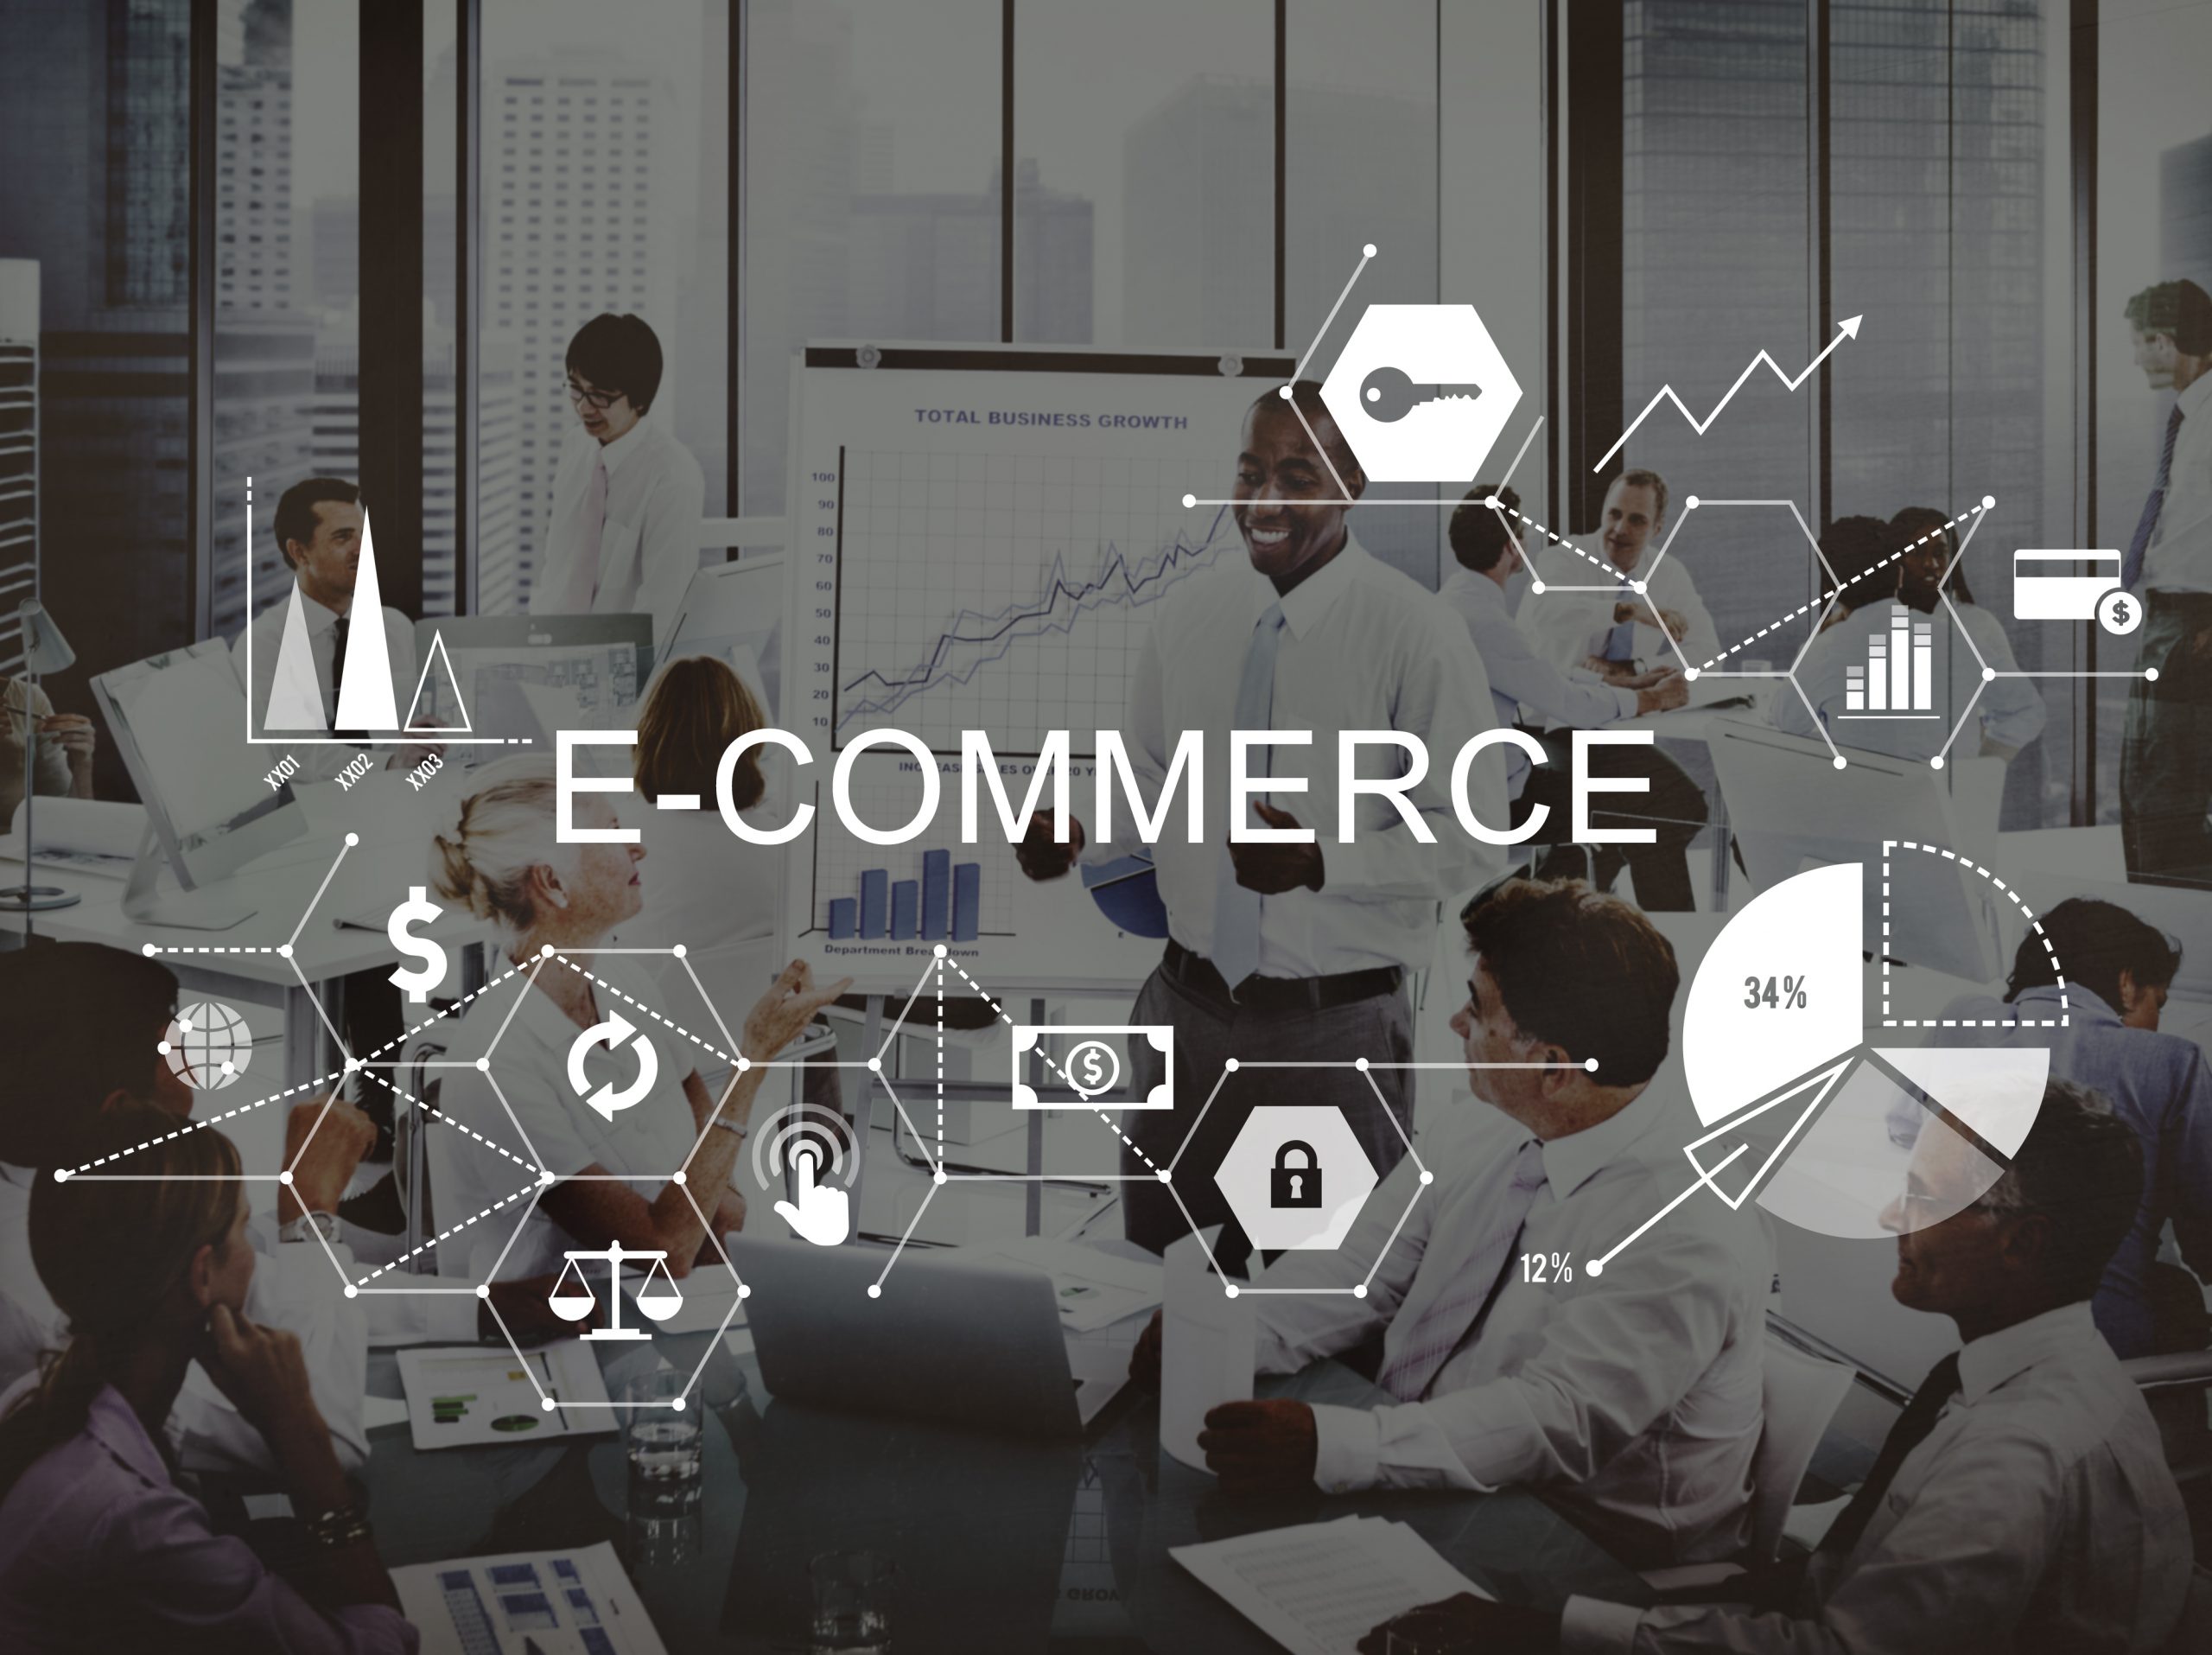 7 Tips to Make Your Ecommerce Business Wildly Successful